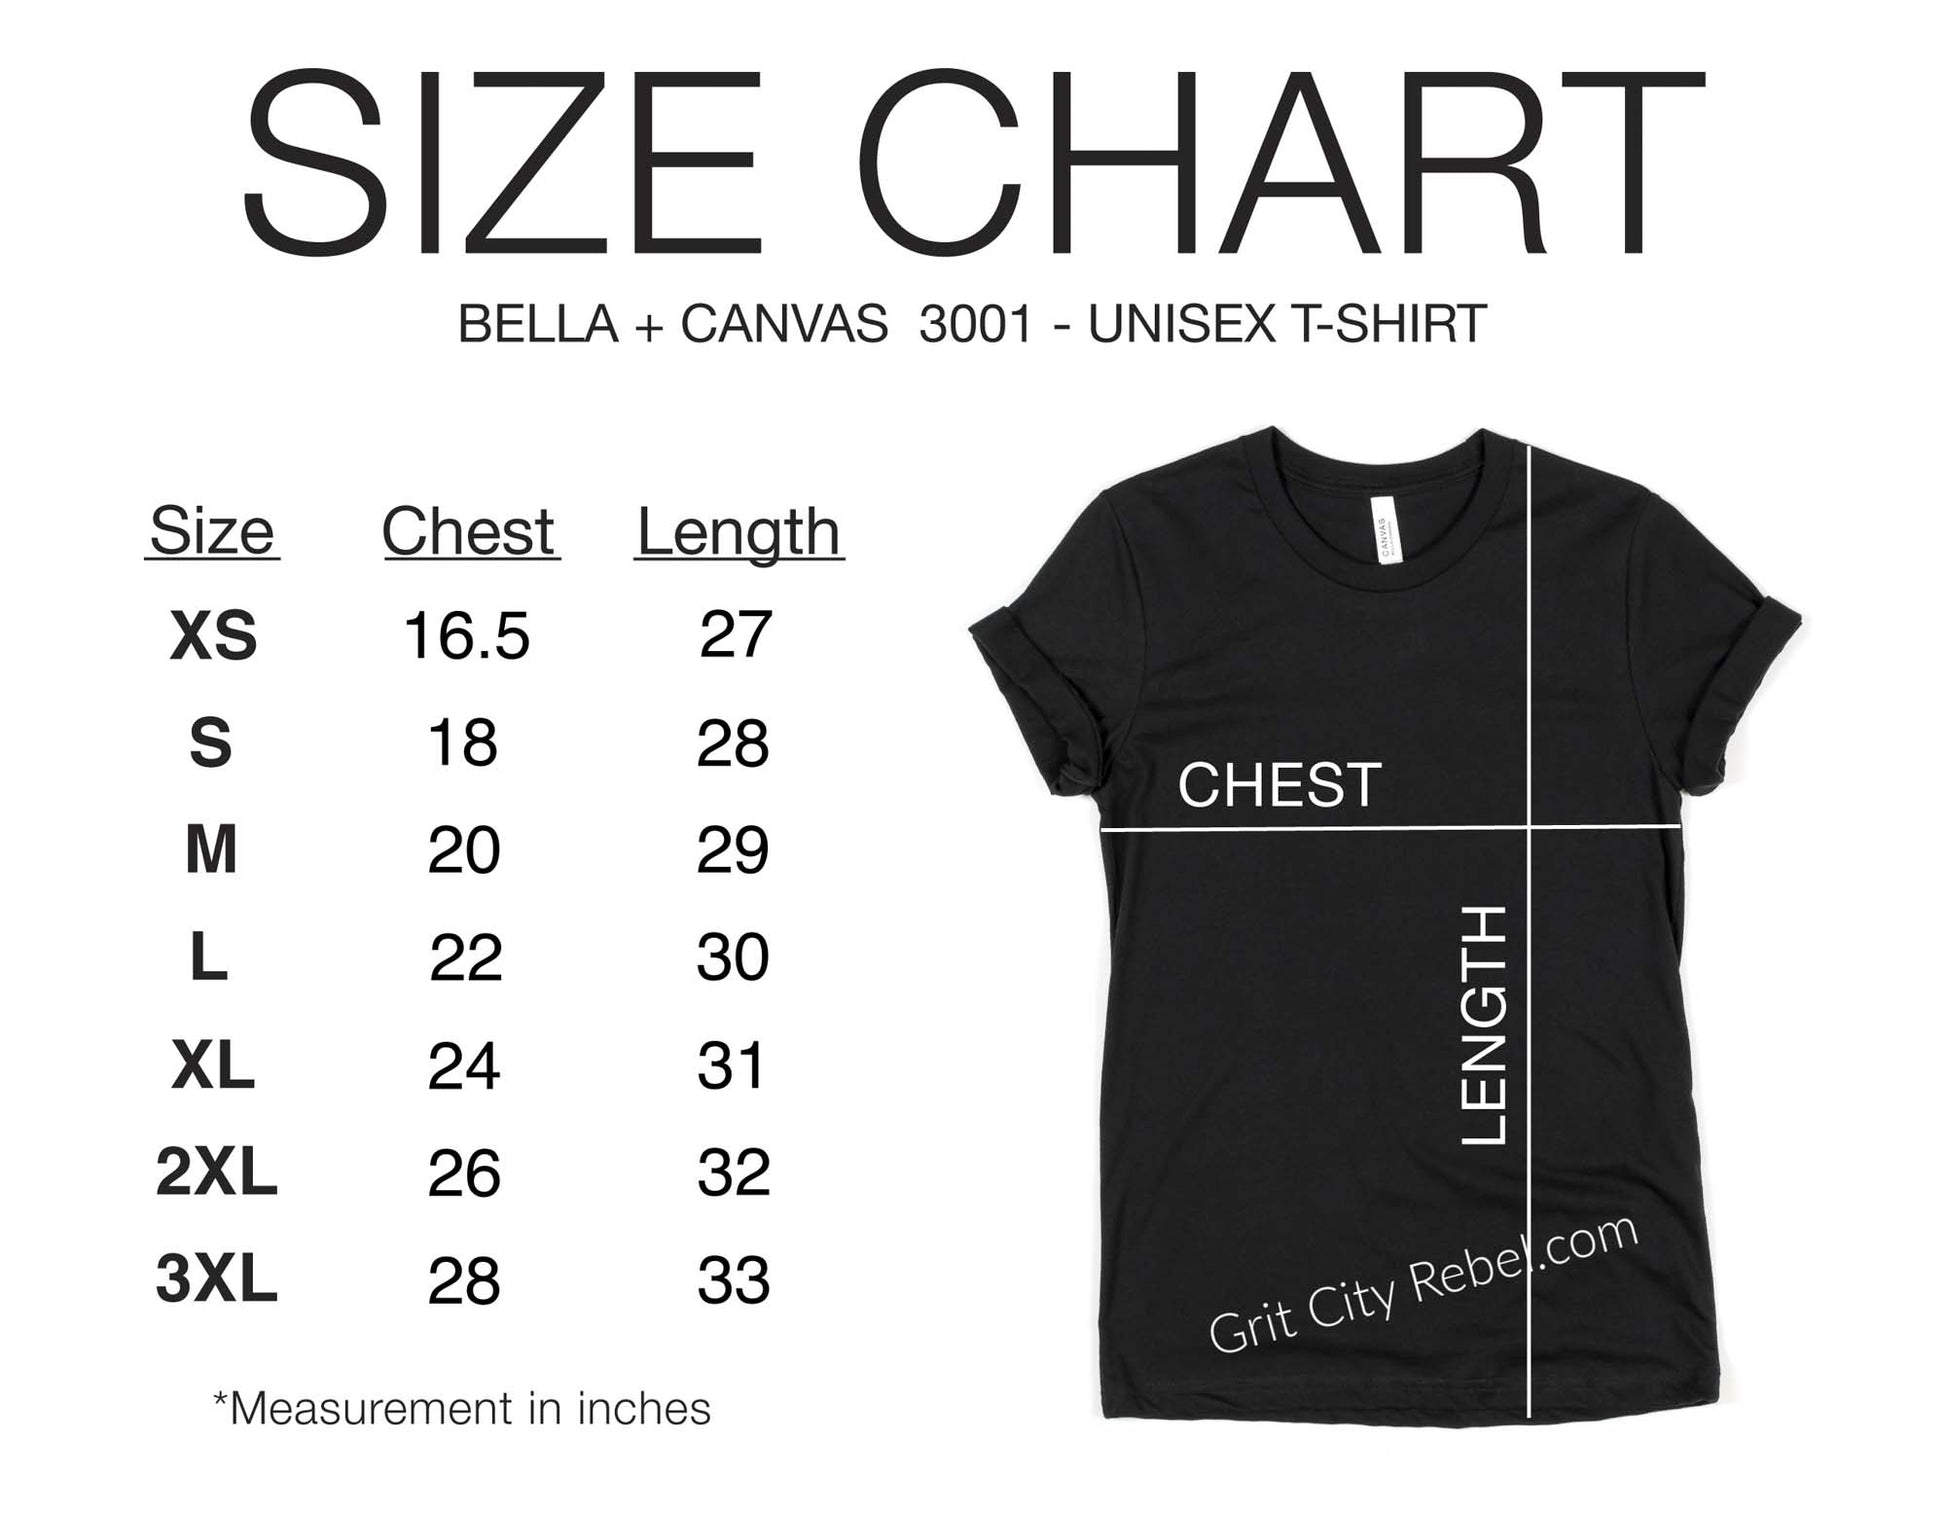 Grit City Rebel sizing chart small to 3X